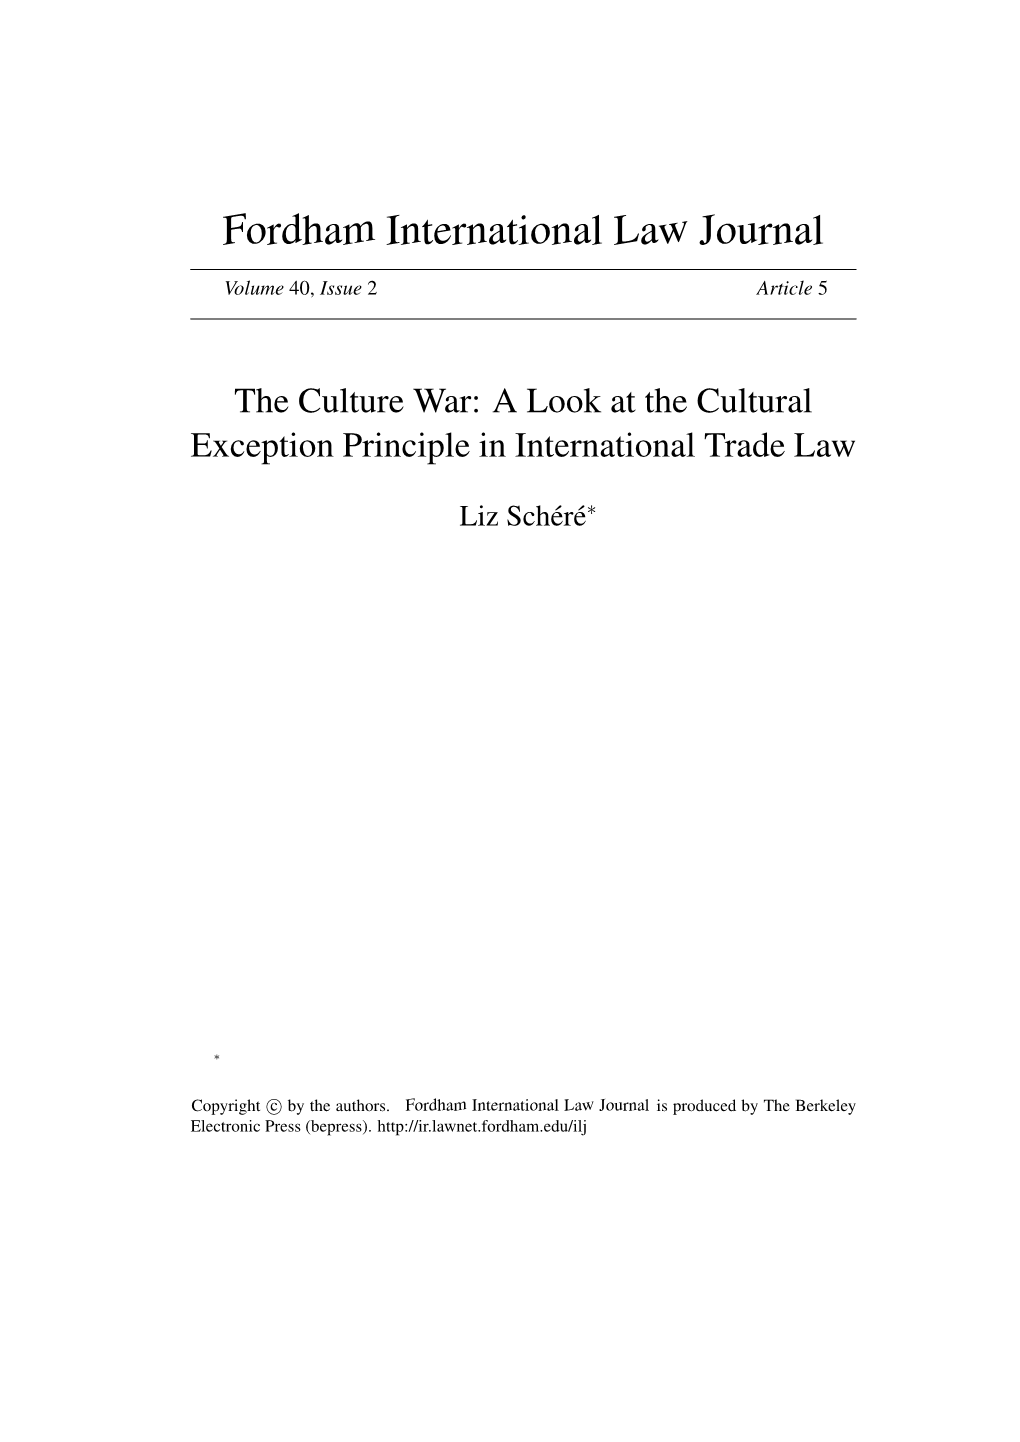 The Culture War: a Look at the Cultural Exception Principle in International Trade Law